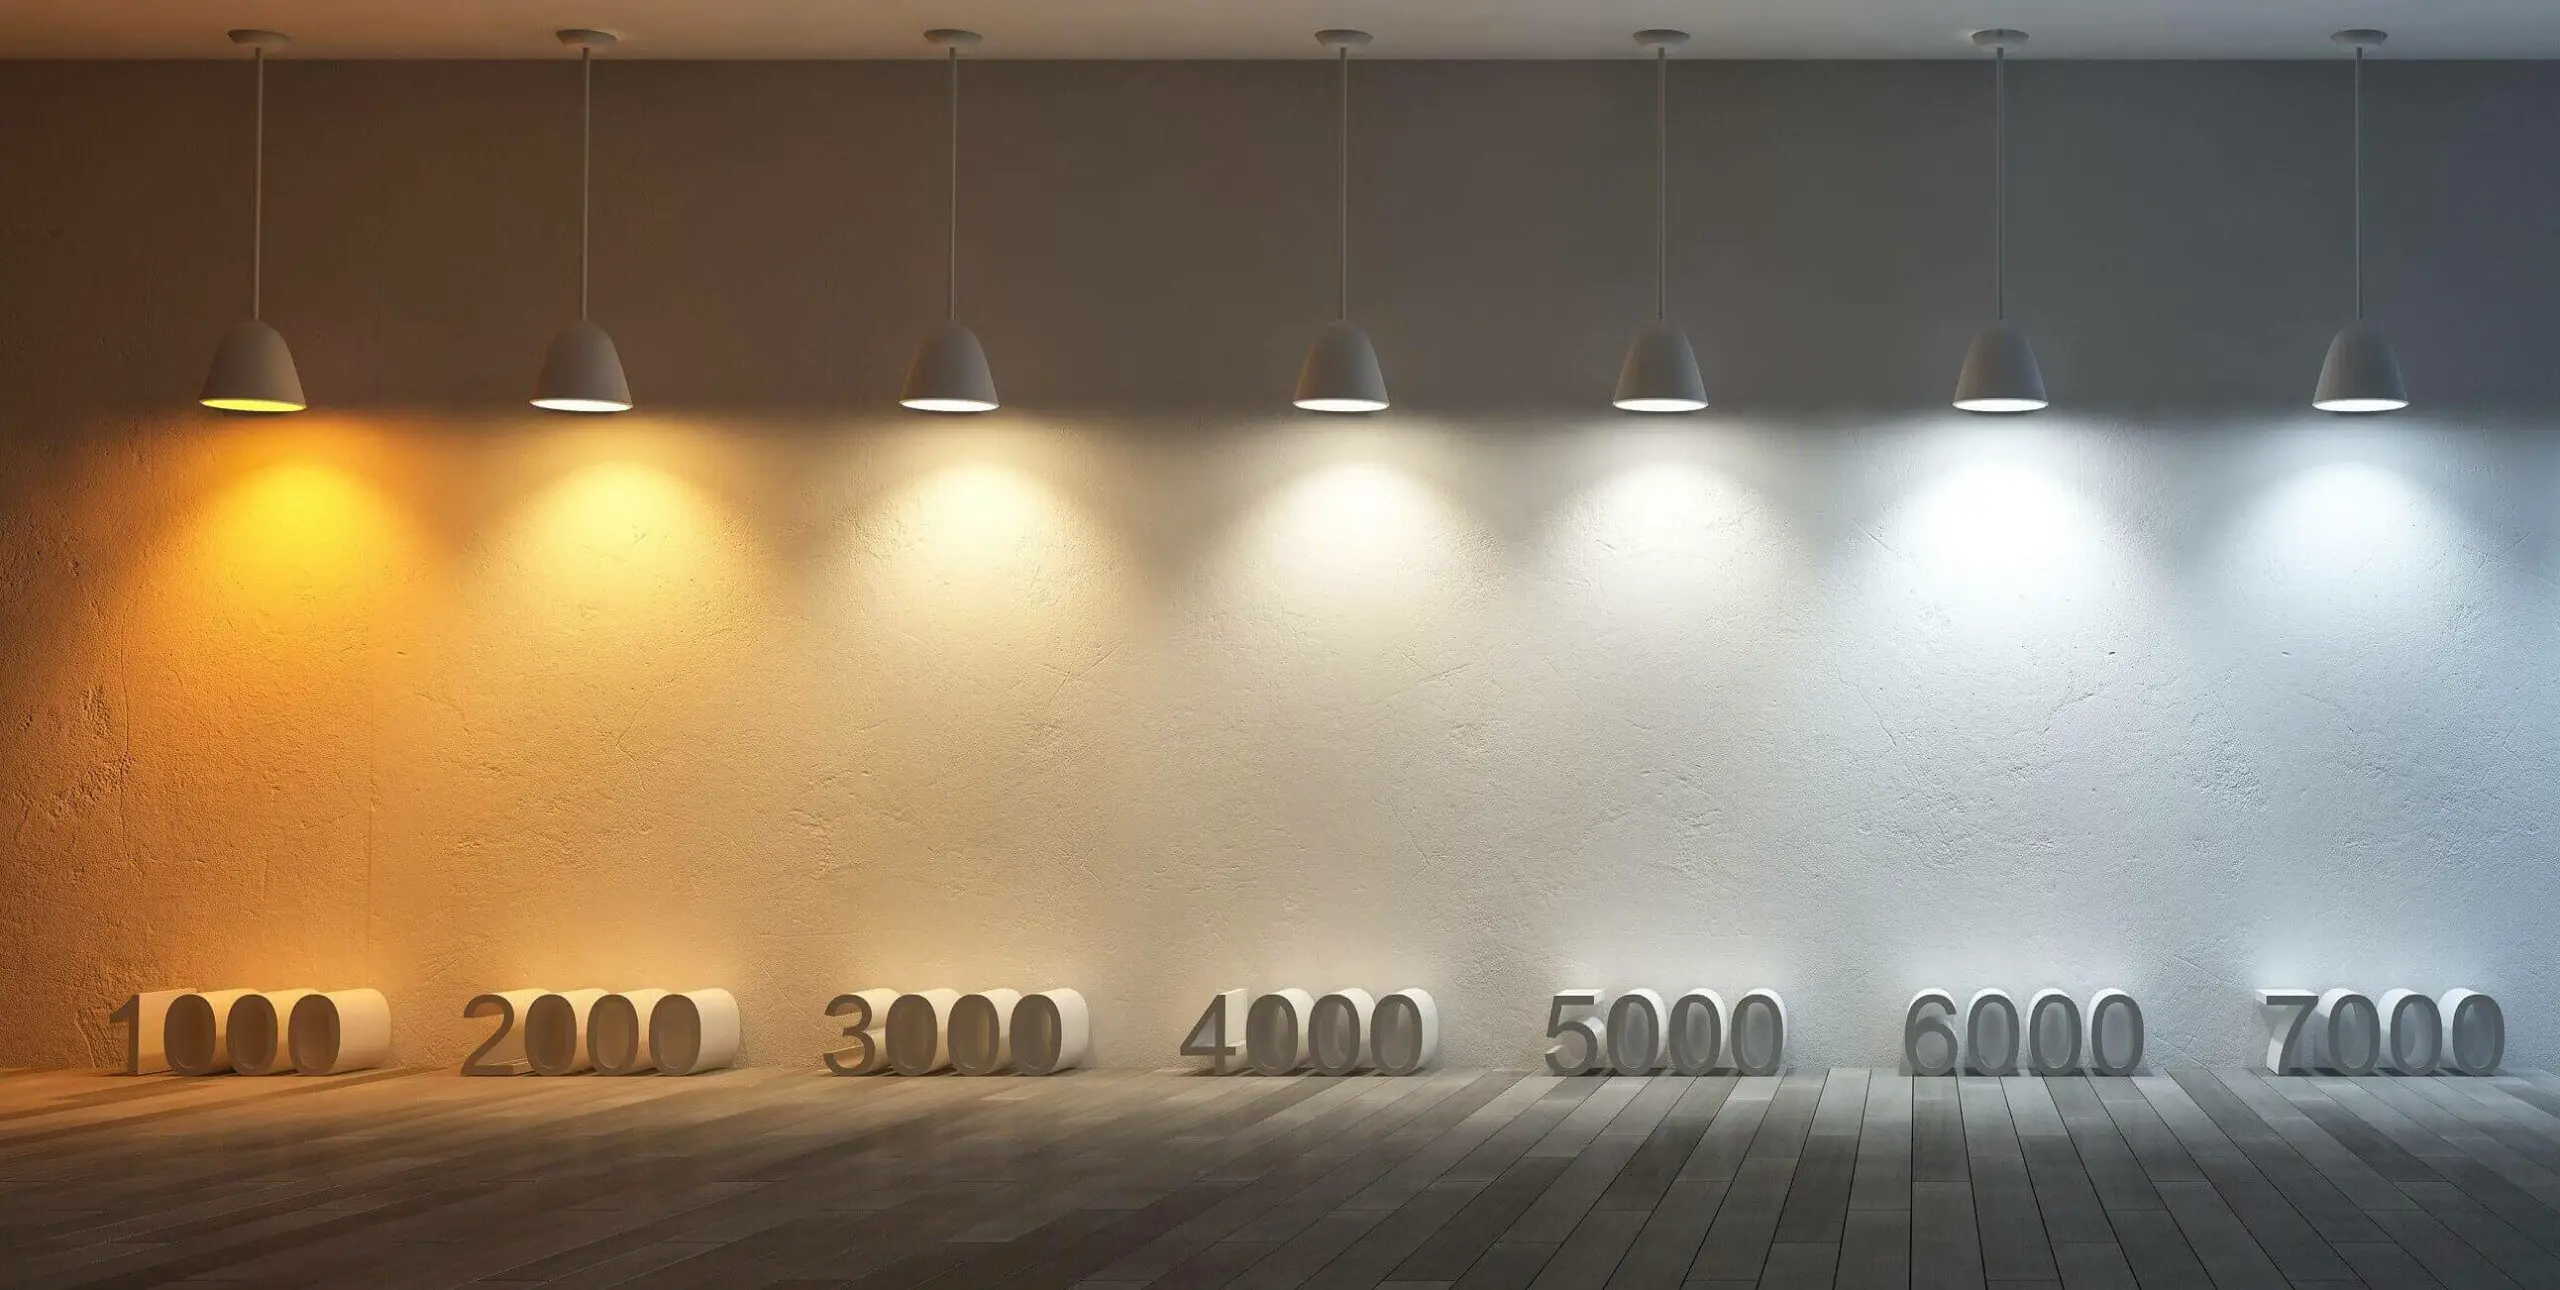 White bulbs of increasing color temperature showcasing the difference between warm white and cool white light